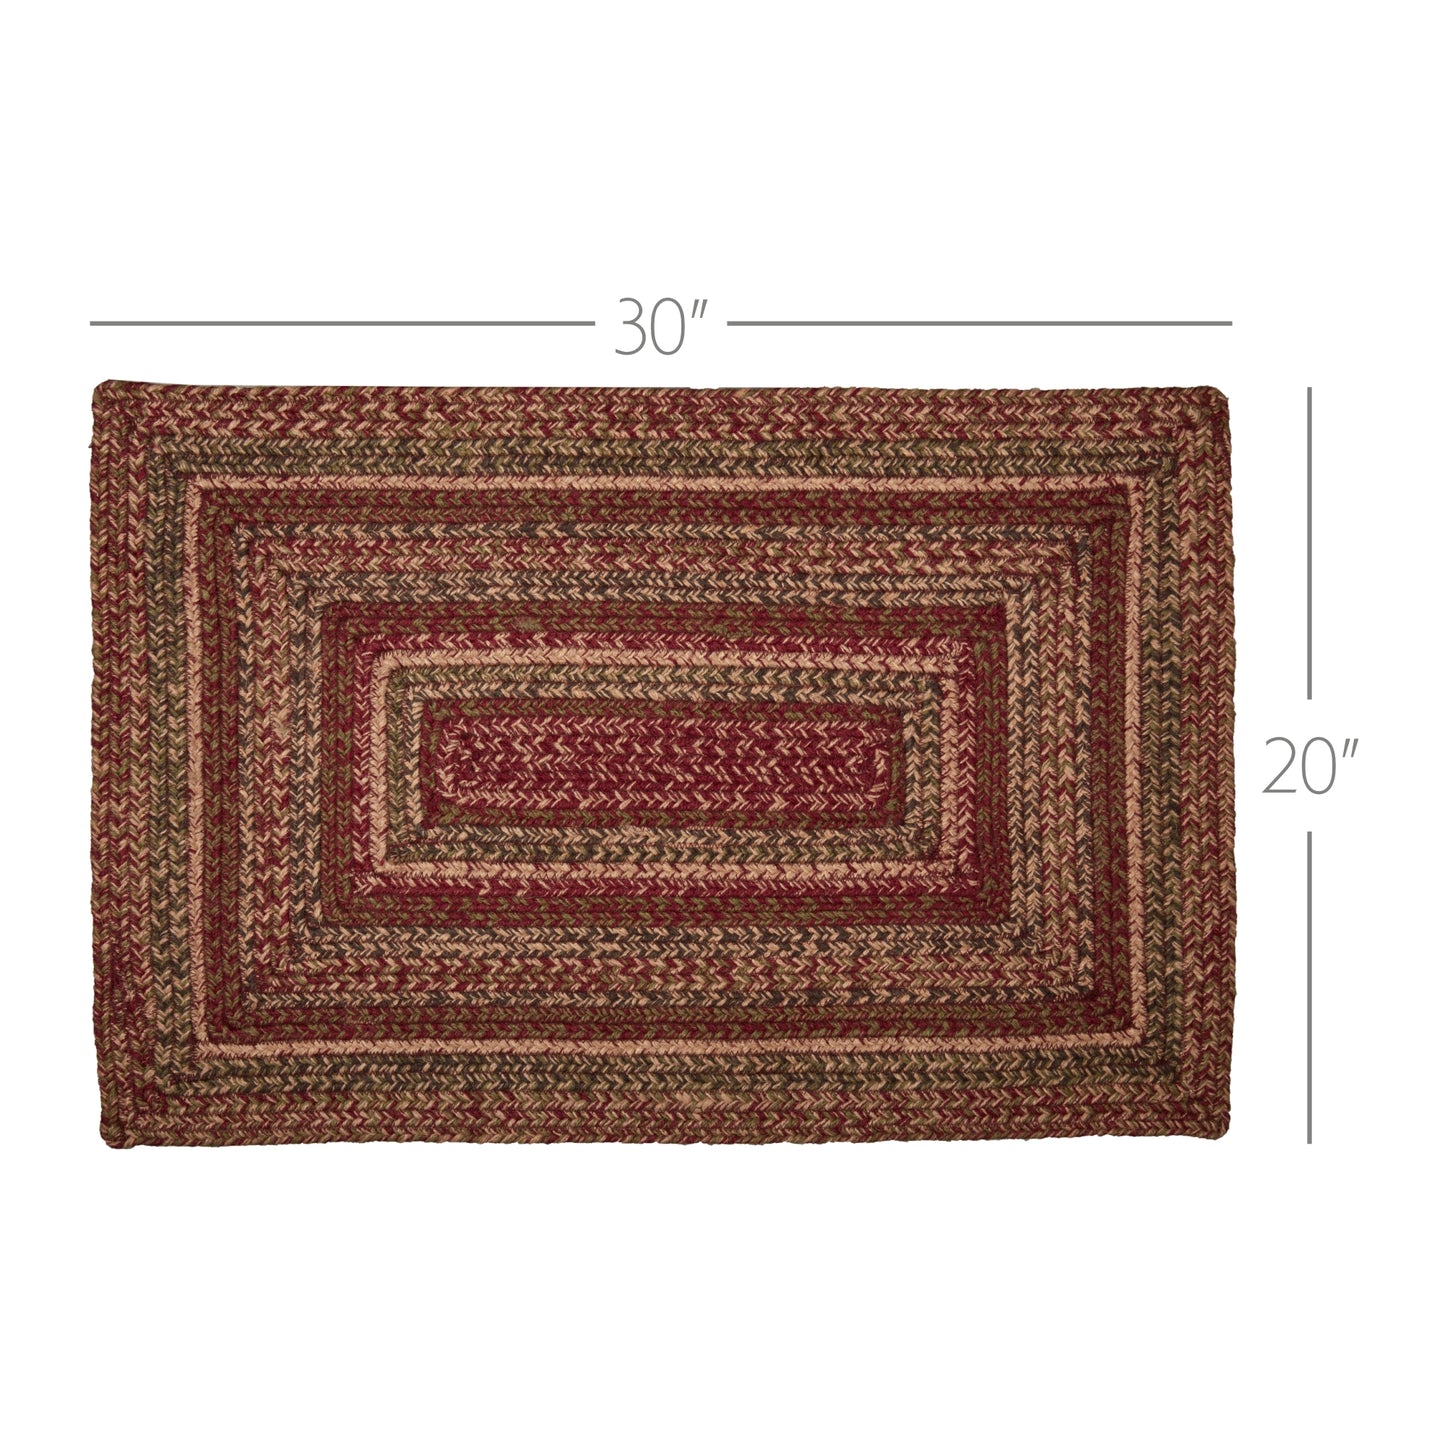 69483-Cider-Mill-Jute-Rug-Rect-w-Pad-20x30-image-2